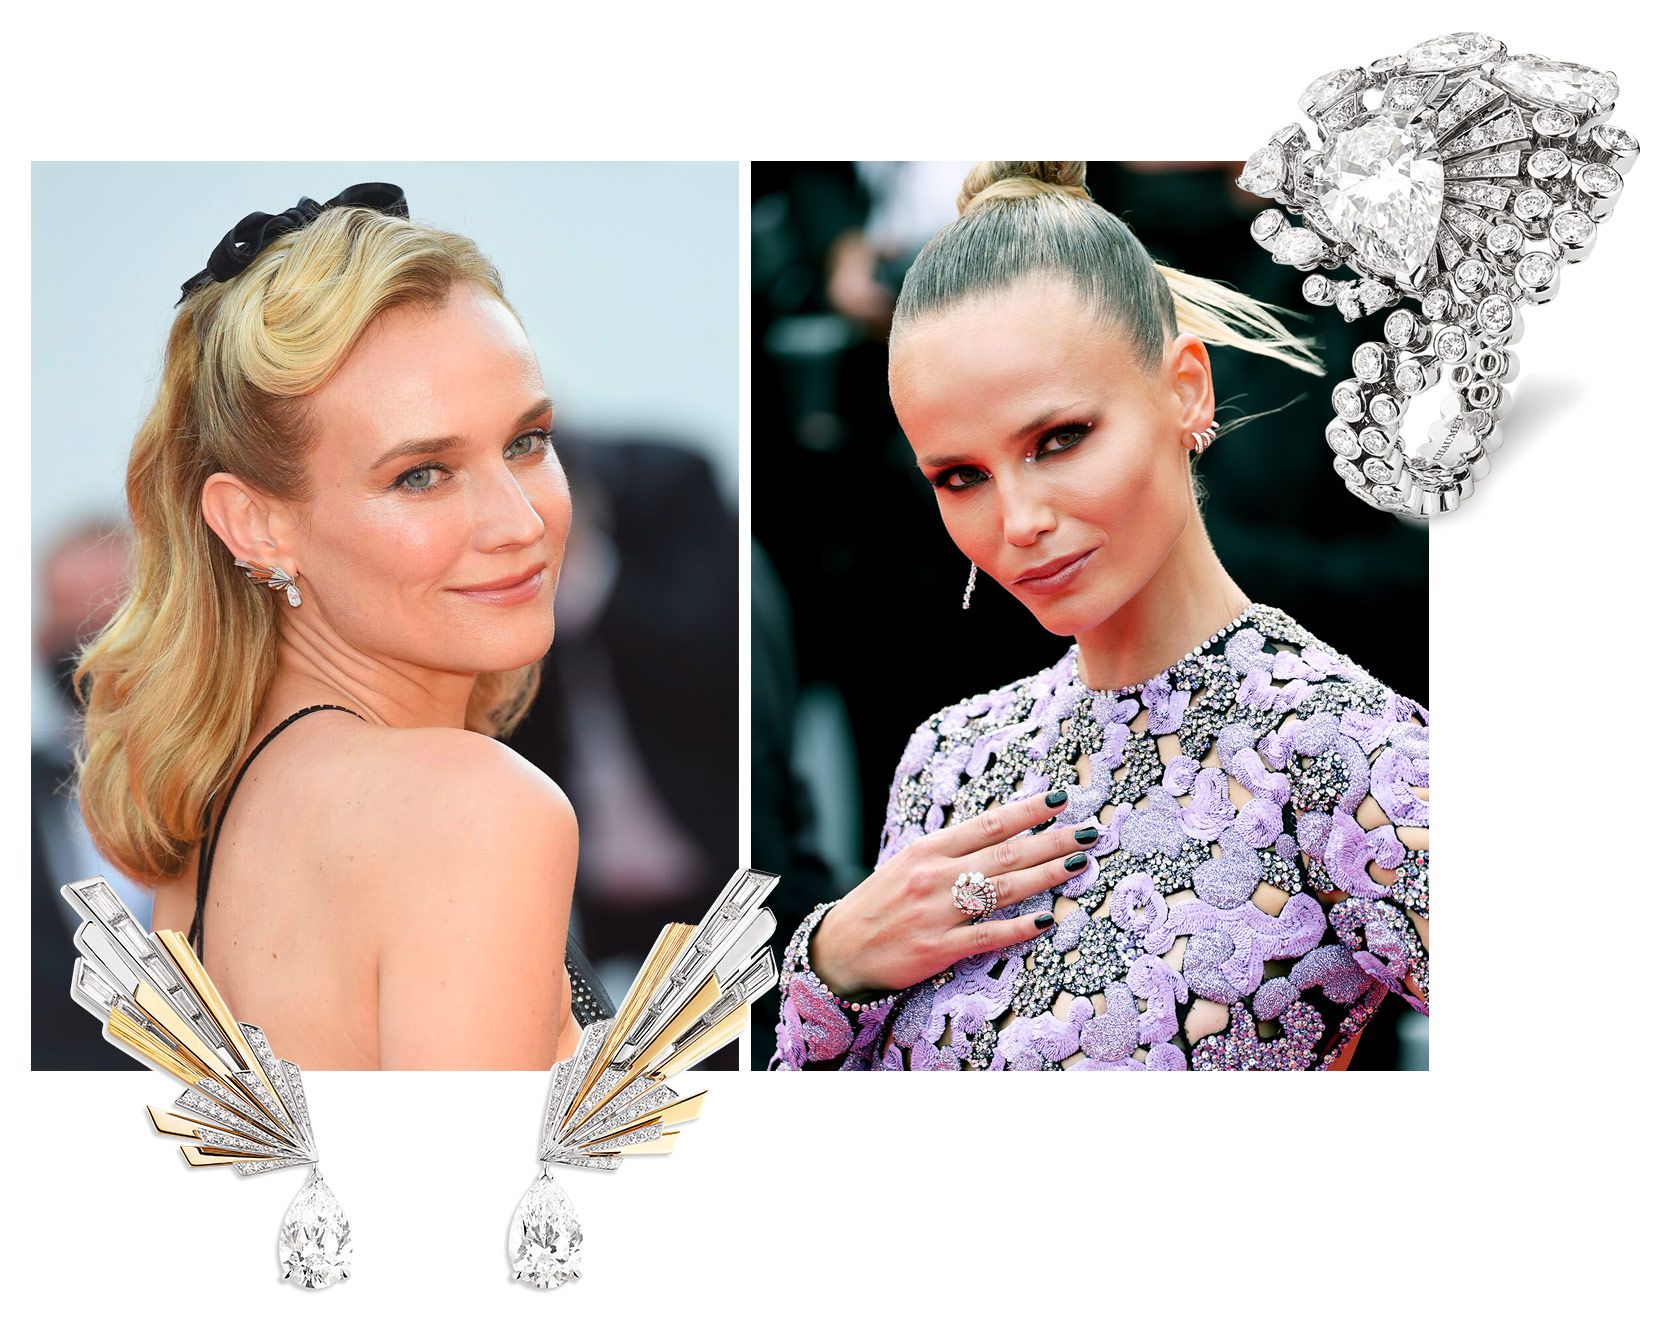 Actress Diane Kruger and model Natasha Poly in High Jewellery creations by Chaumet at the Cannes Film Festival 2021